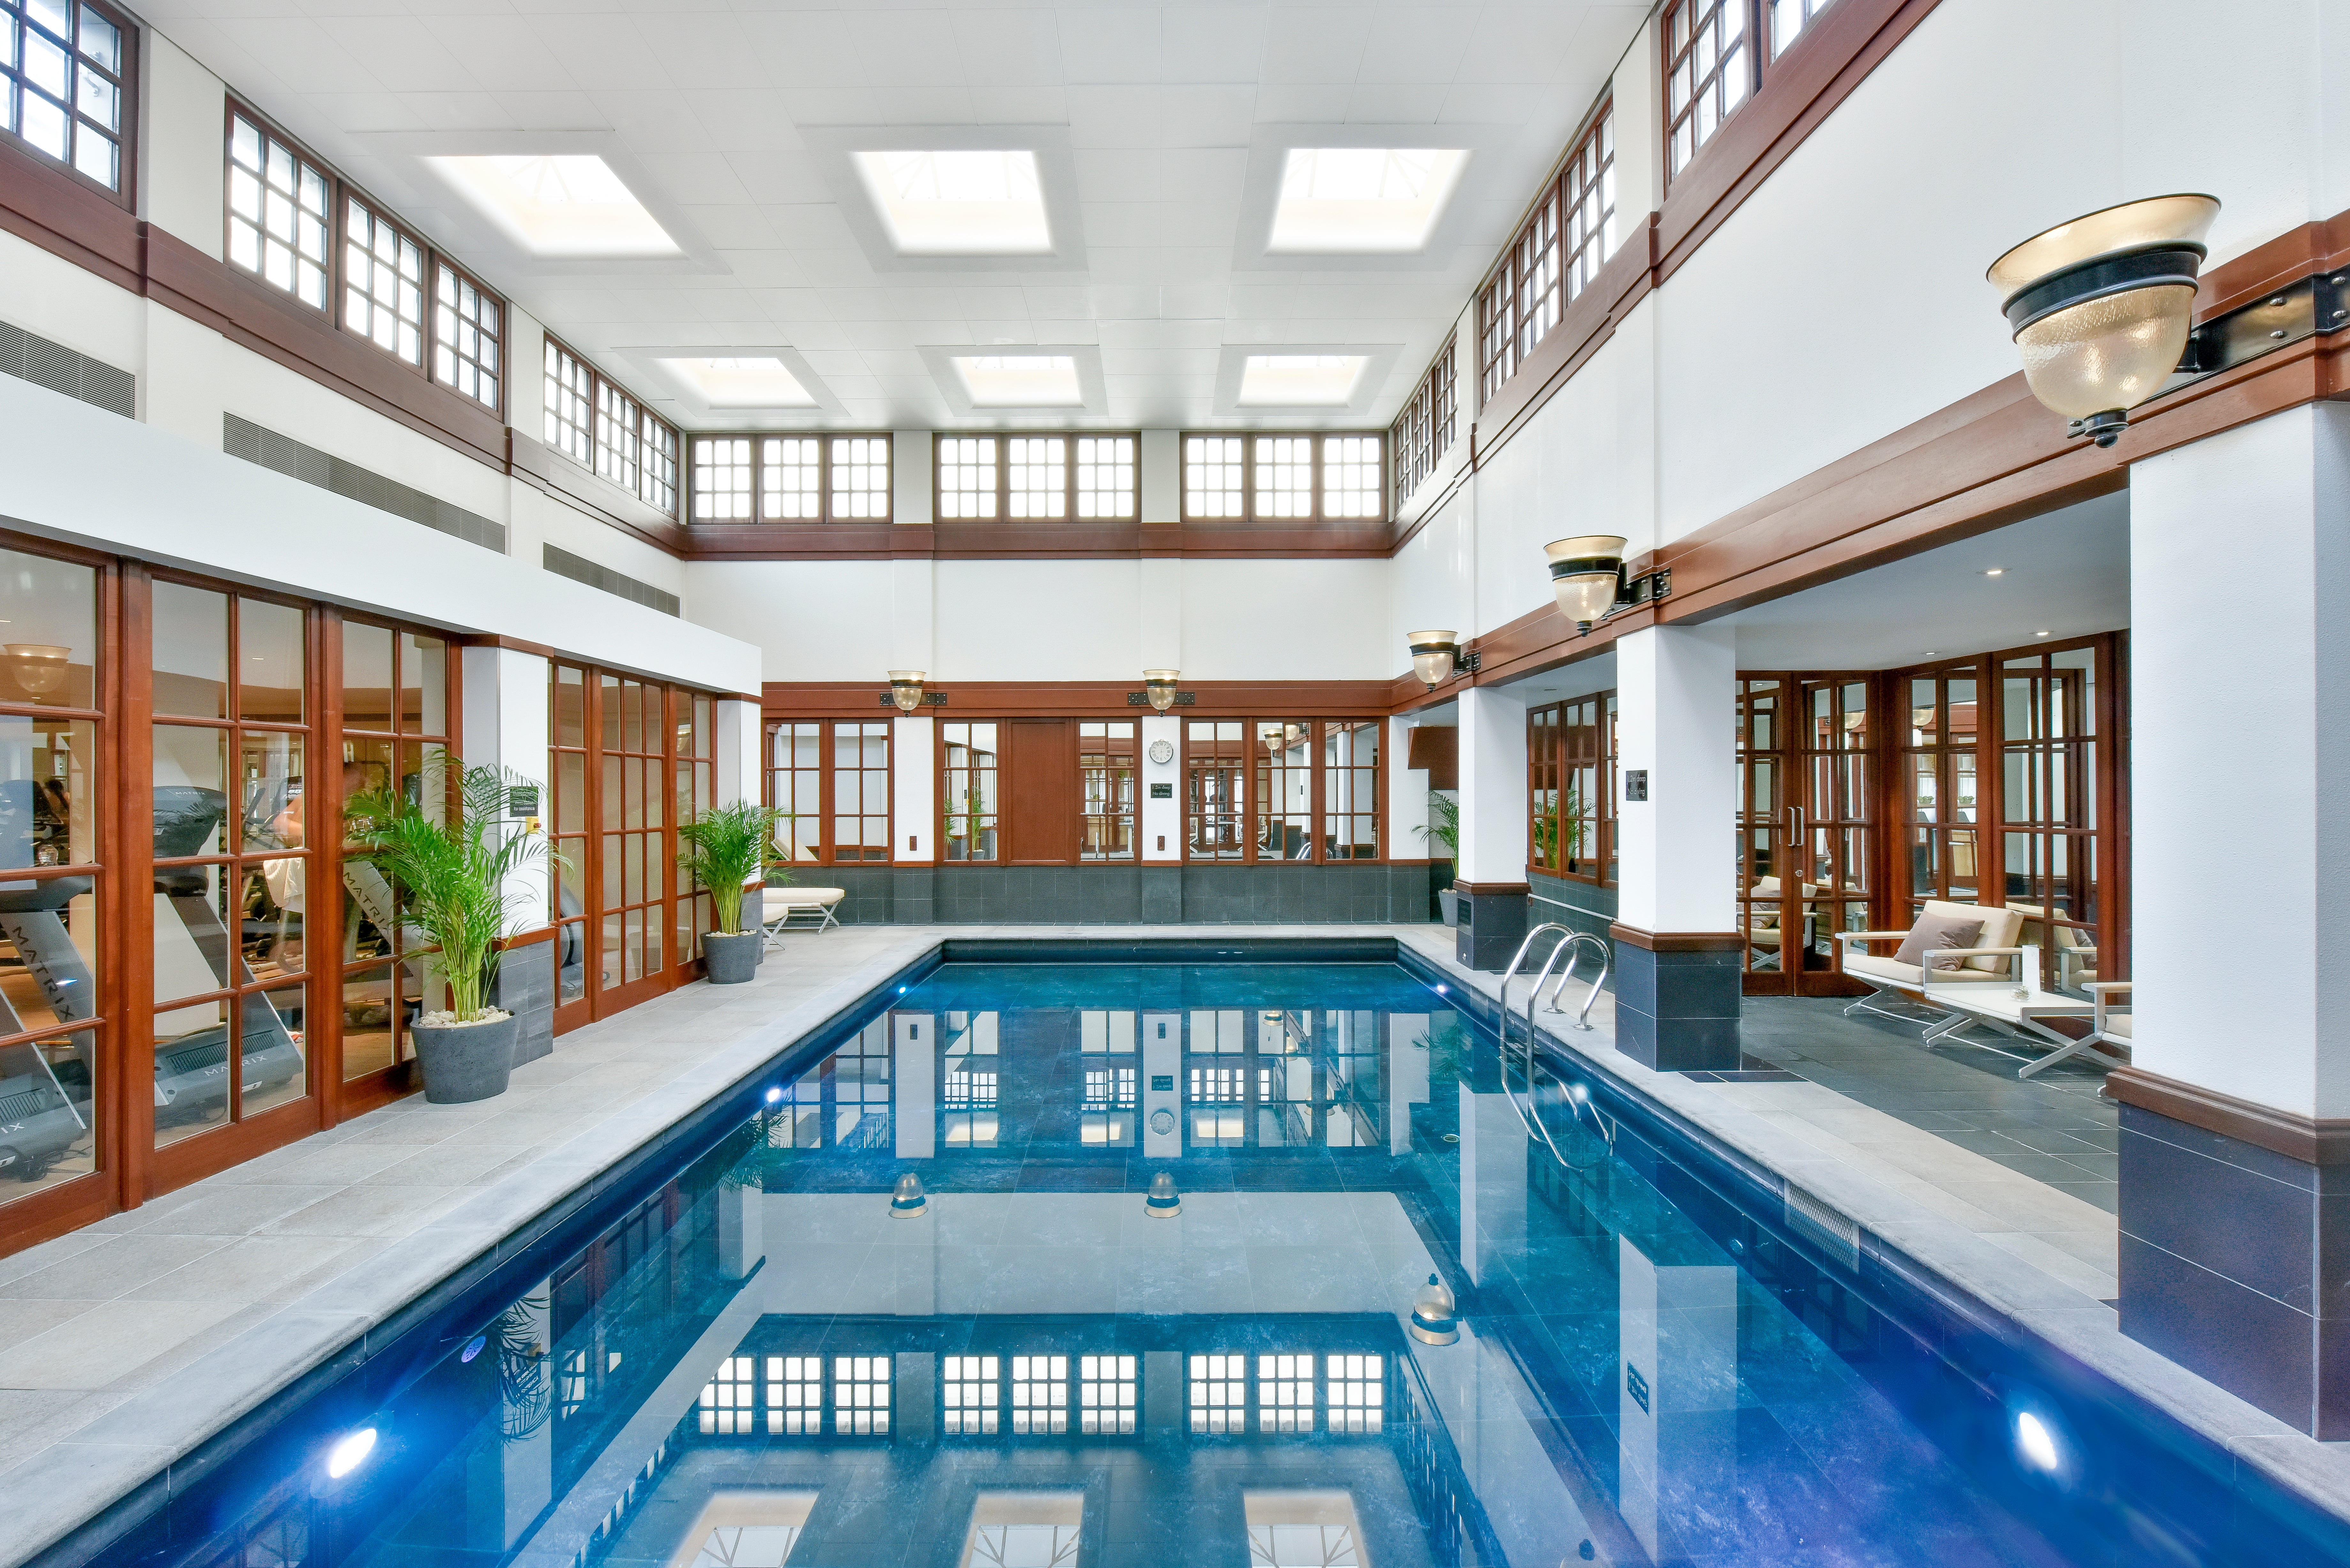 The hotel’s 10-metre fitness pool